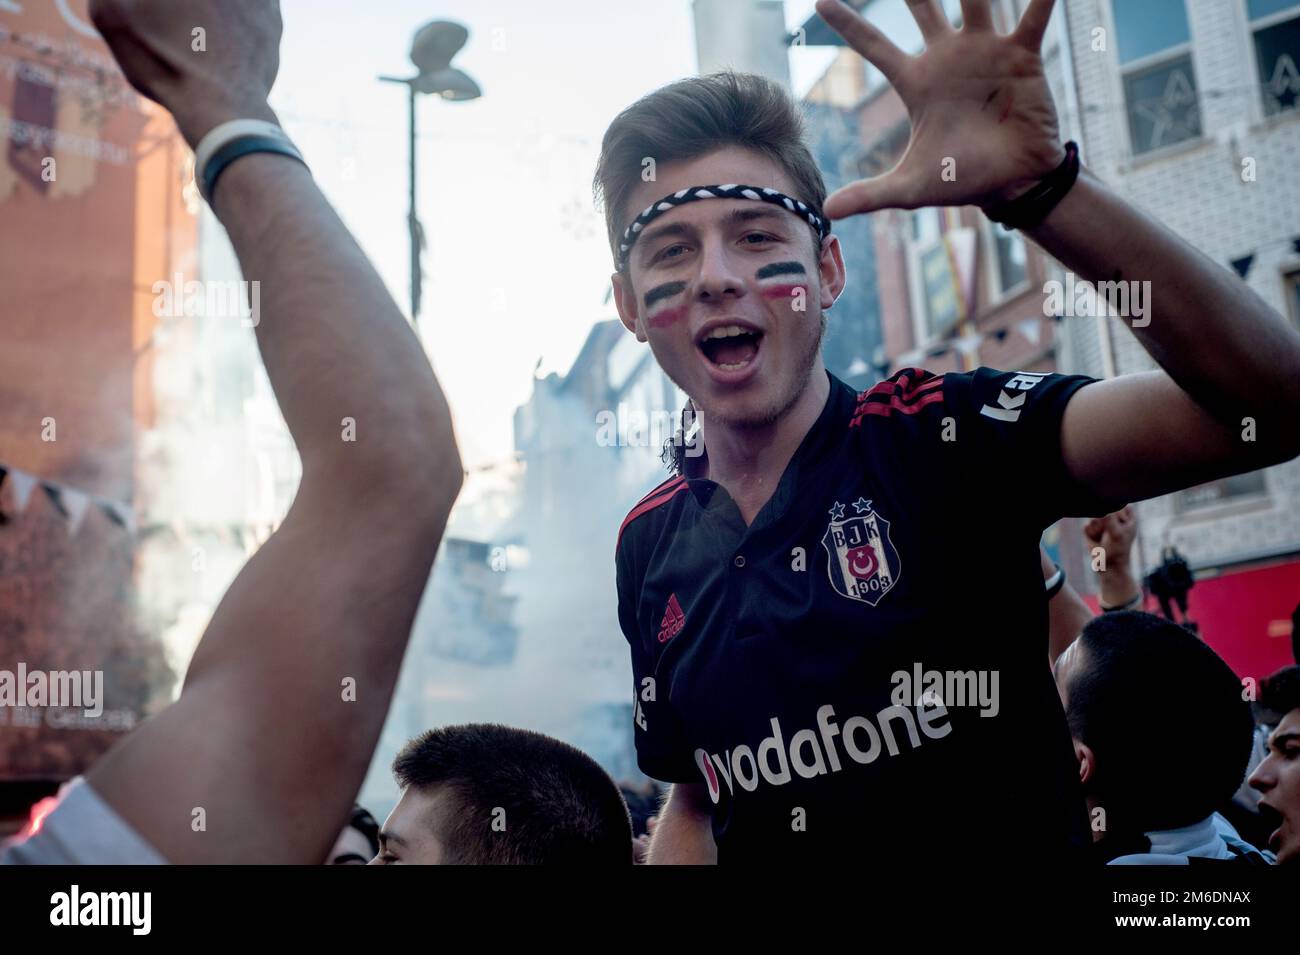 Besiktas Carsi football supporters singing songs before a match in Istanbul, Turkey. Stock Photo